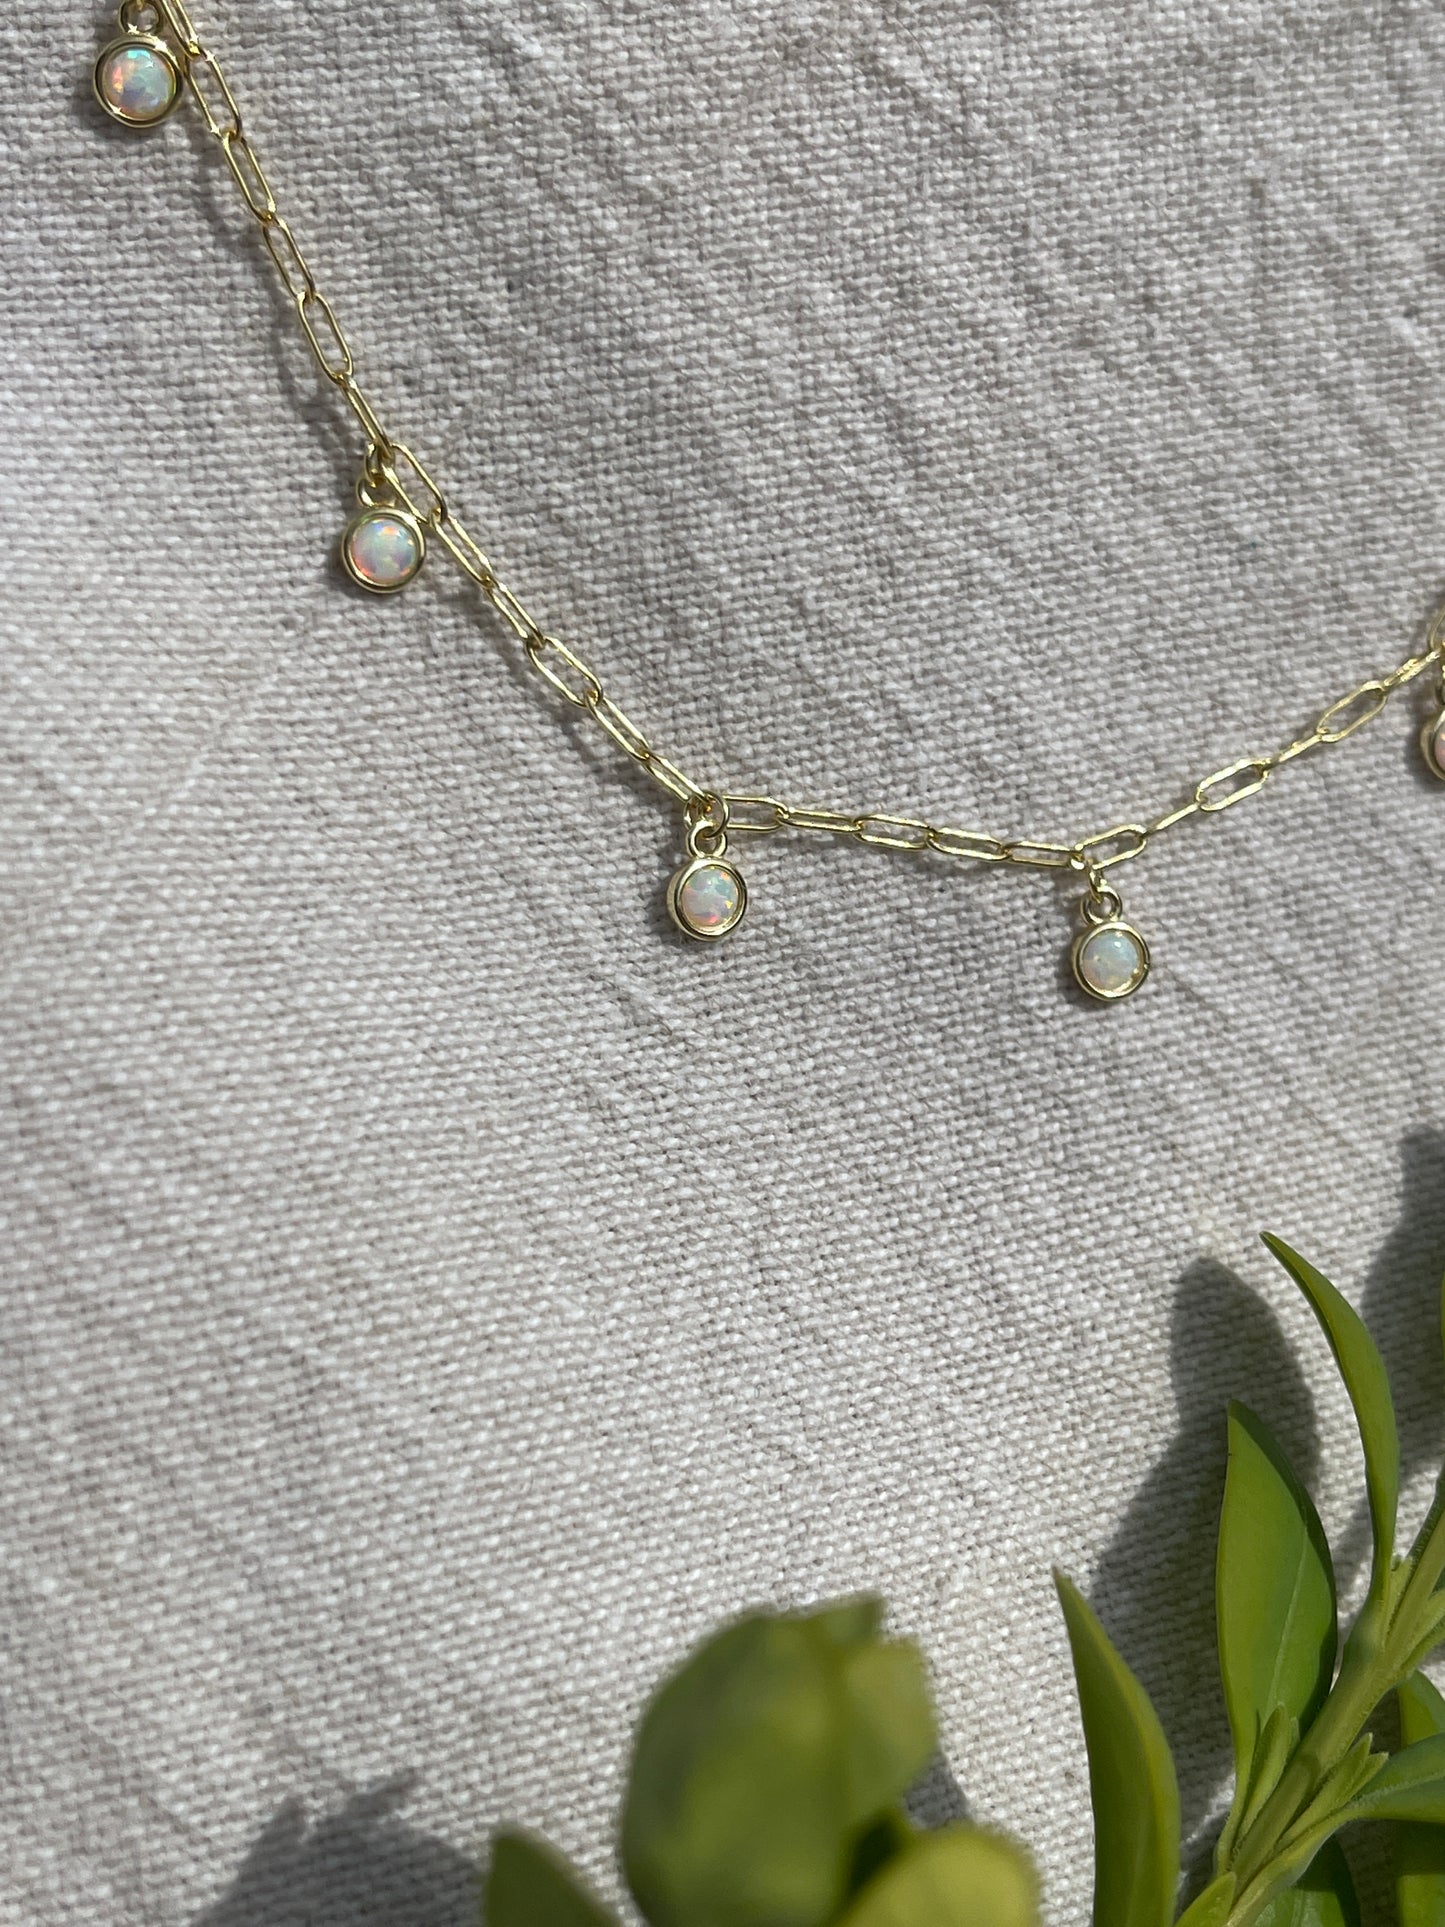 Dainty Crystal Necklace